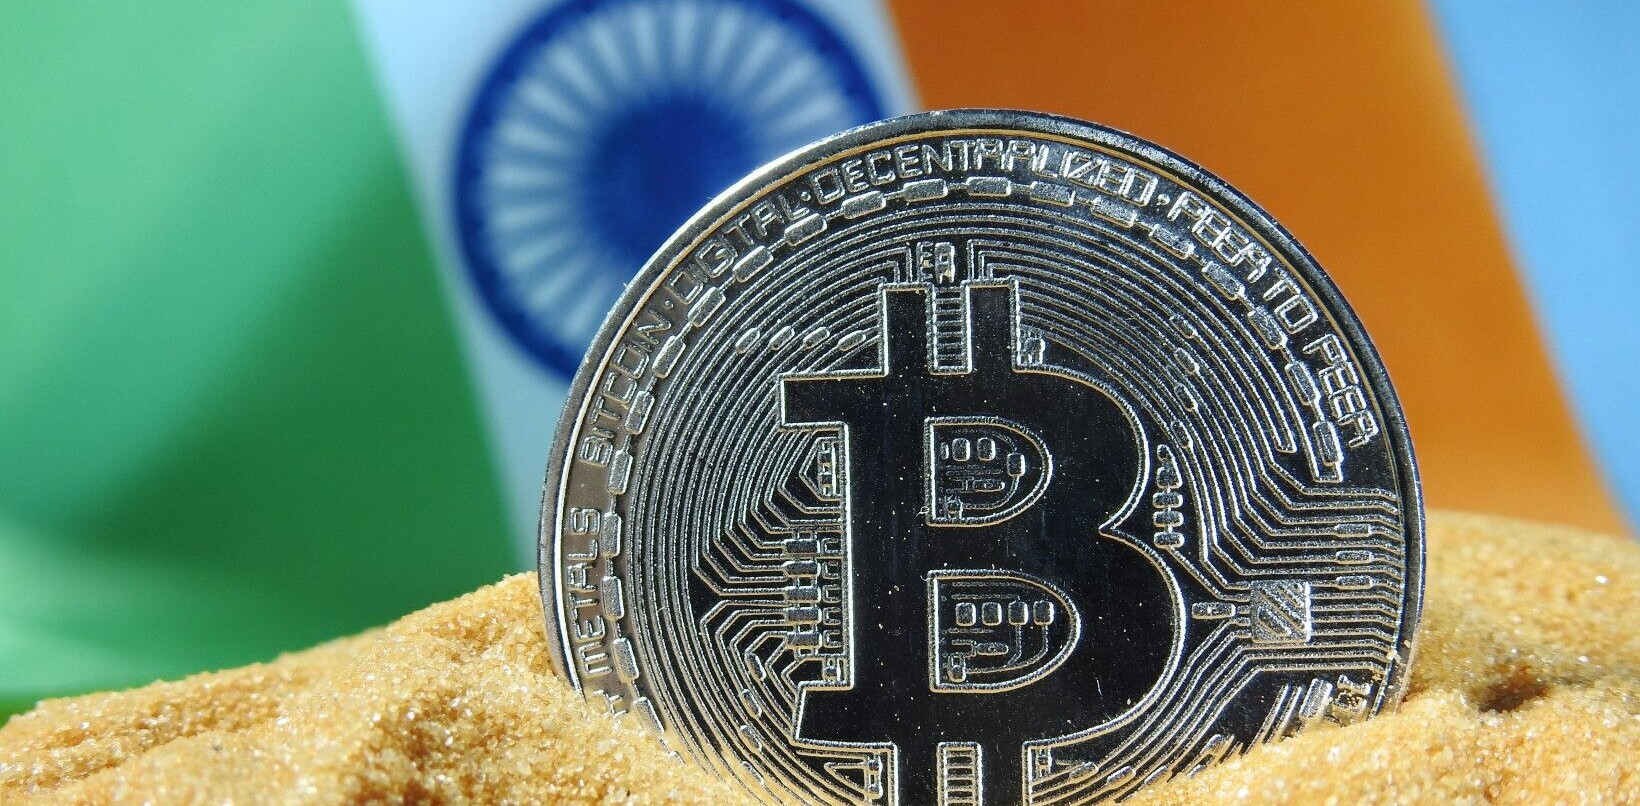 India’s new crypto rules are making life hard for hodlers